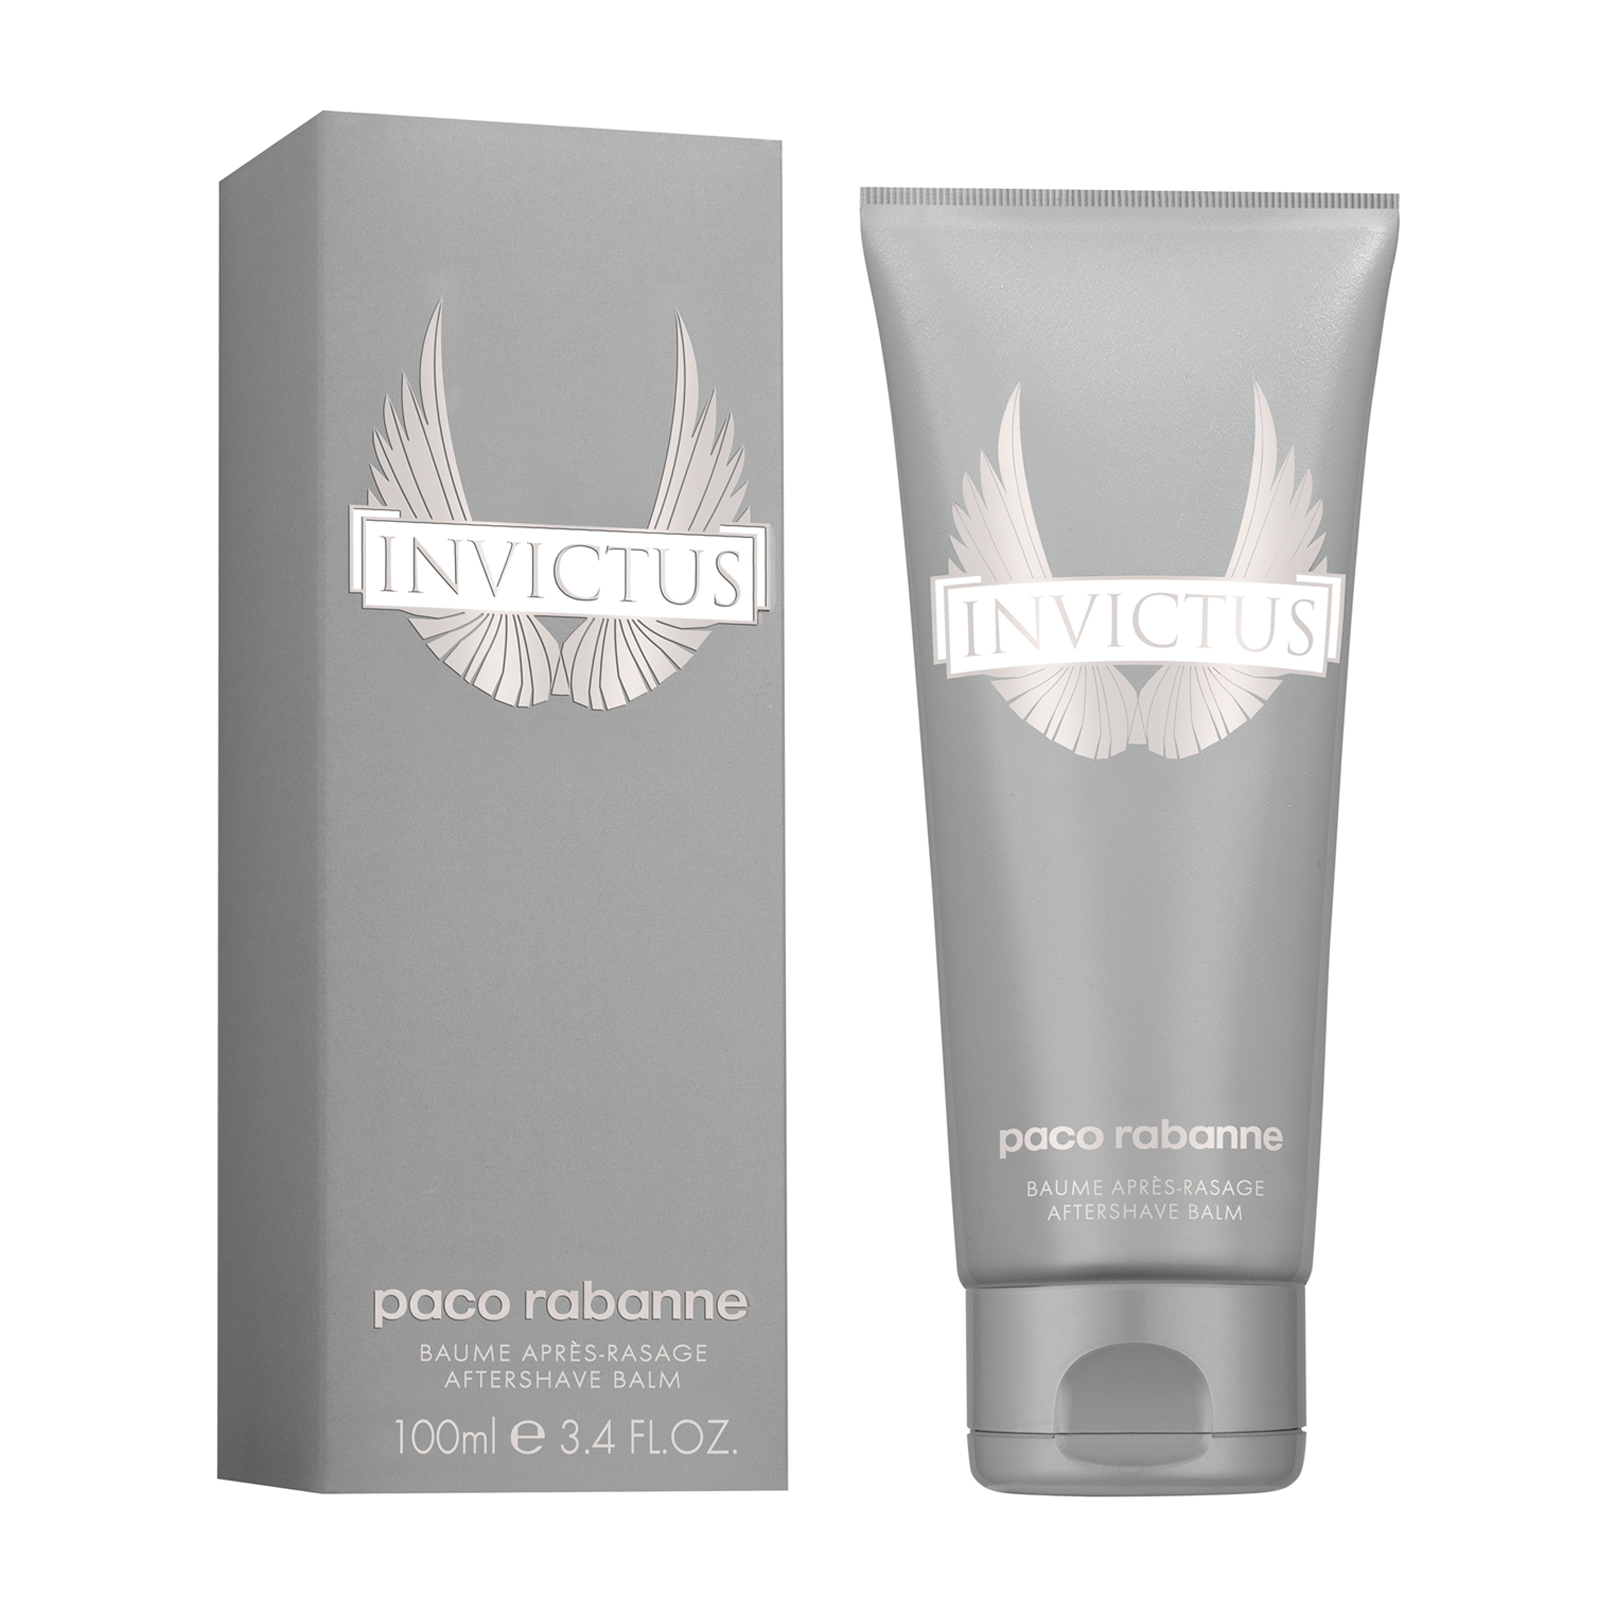 Paco Rabanne Invictus After Shave Balm 100ml - Feelunique